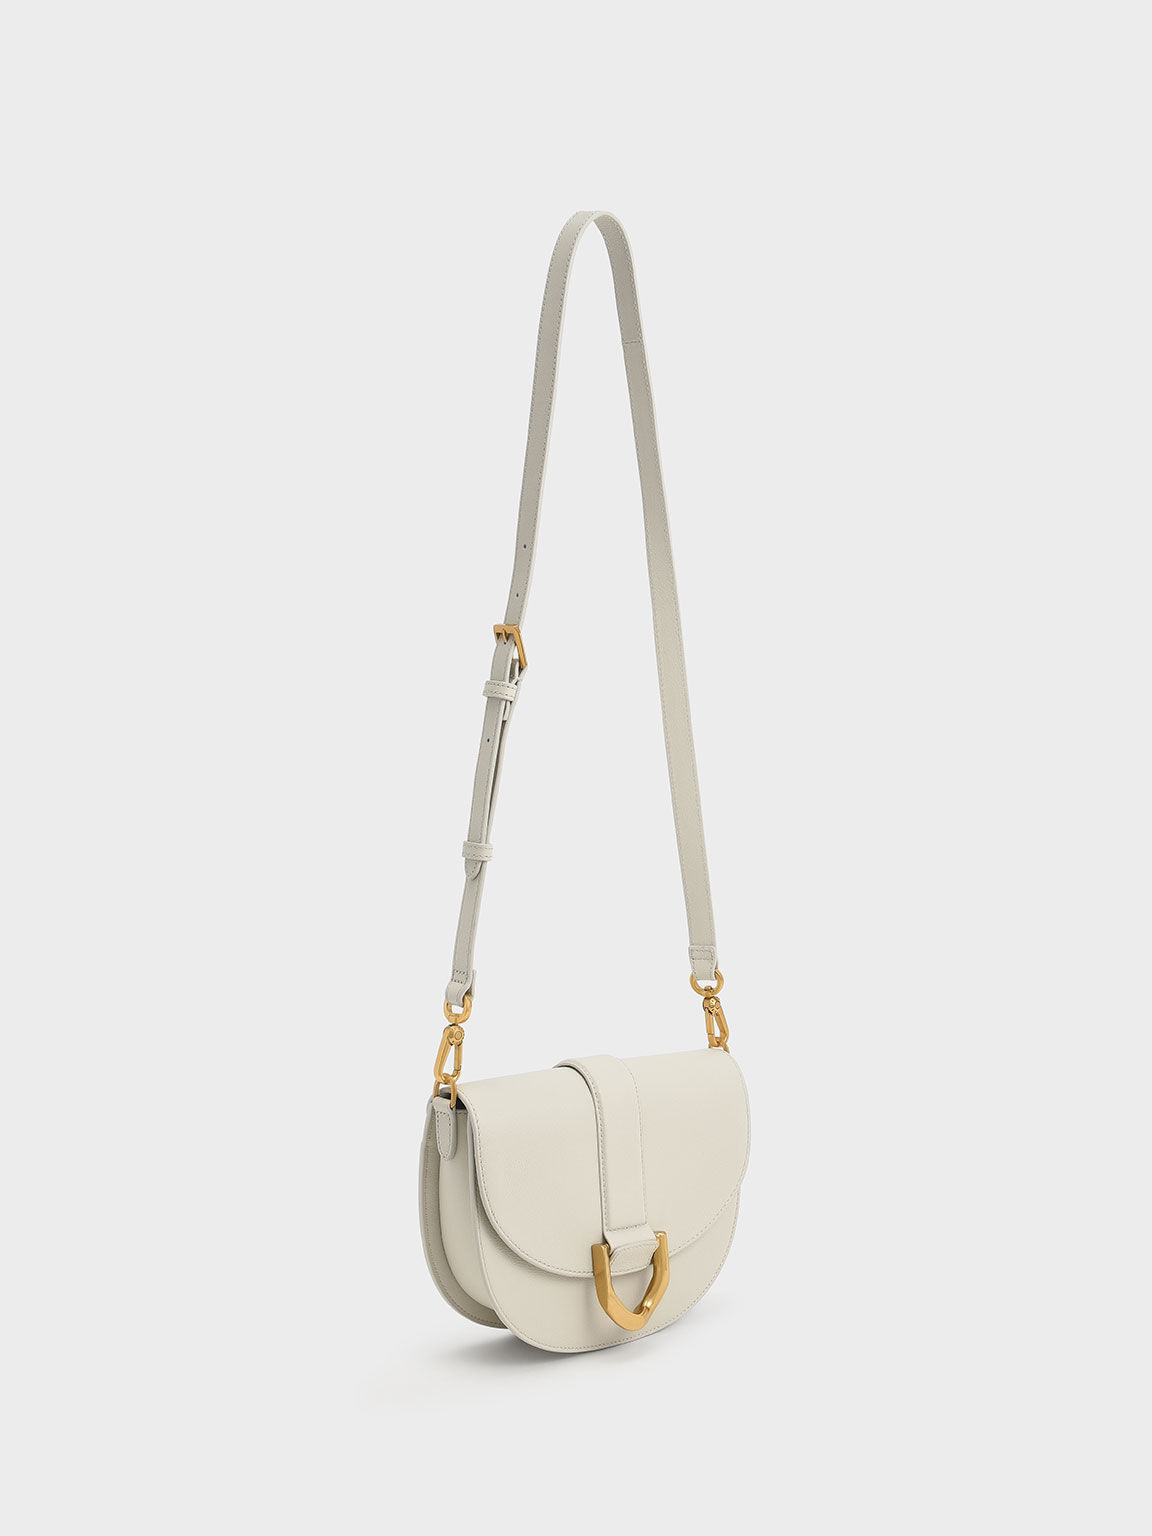 Charles & Keith - Women's Cleona Braided Handle Shoulder Bag, White, L